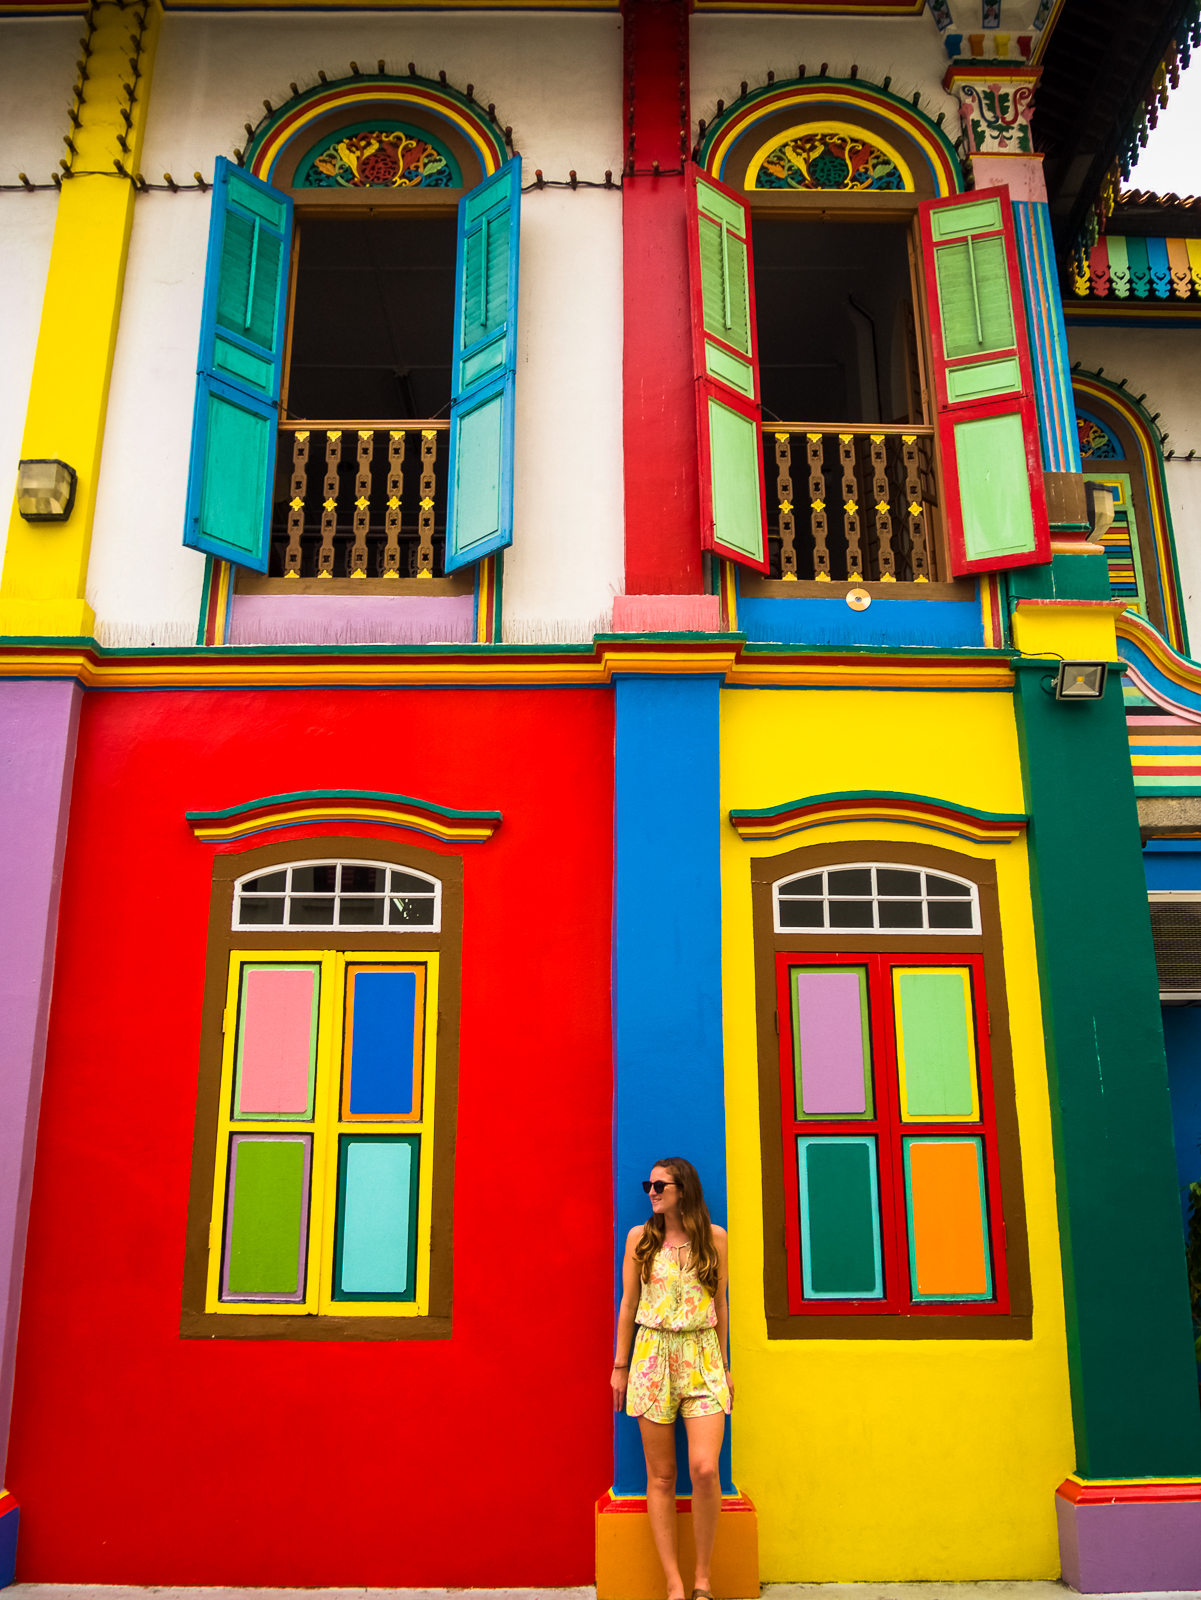 Tan Teng House in Singapore's Little India